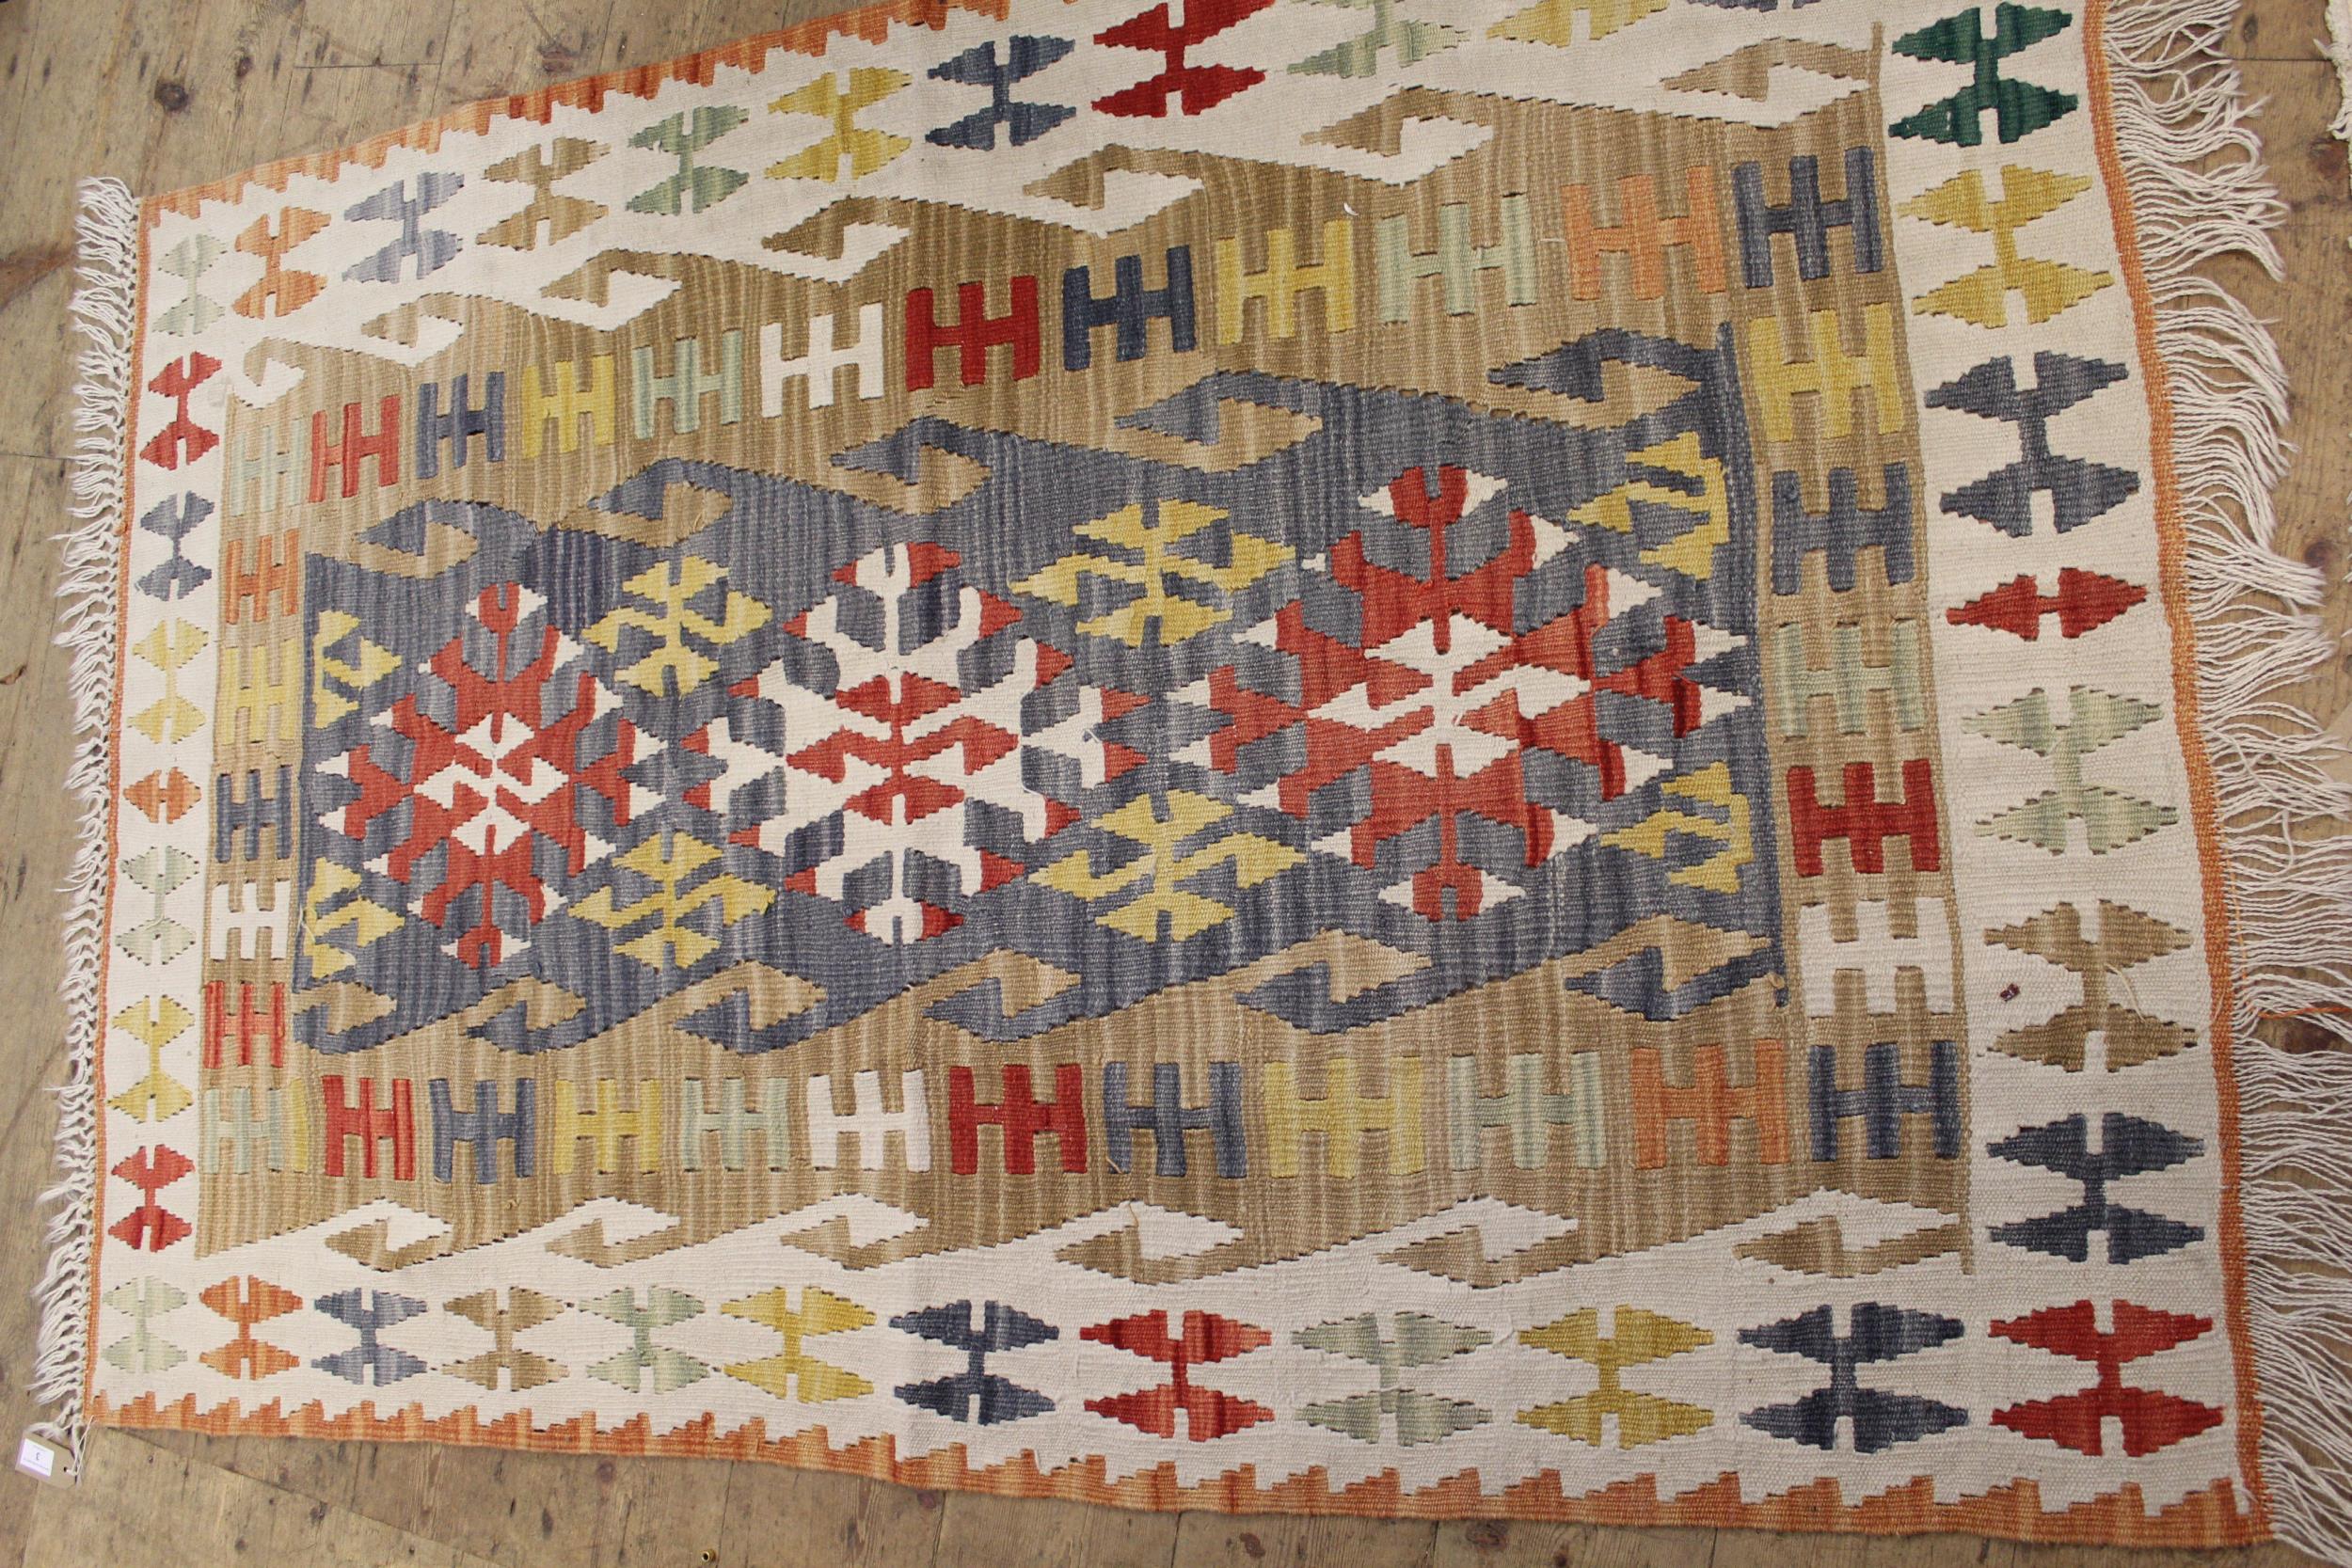 Two small Kelim rugs, 178 x 123cm and 163 x 108cm - Image 2 of 2